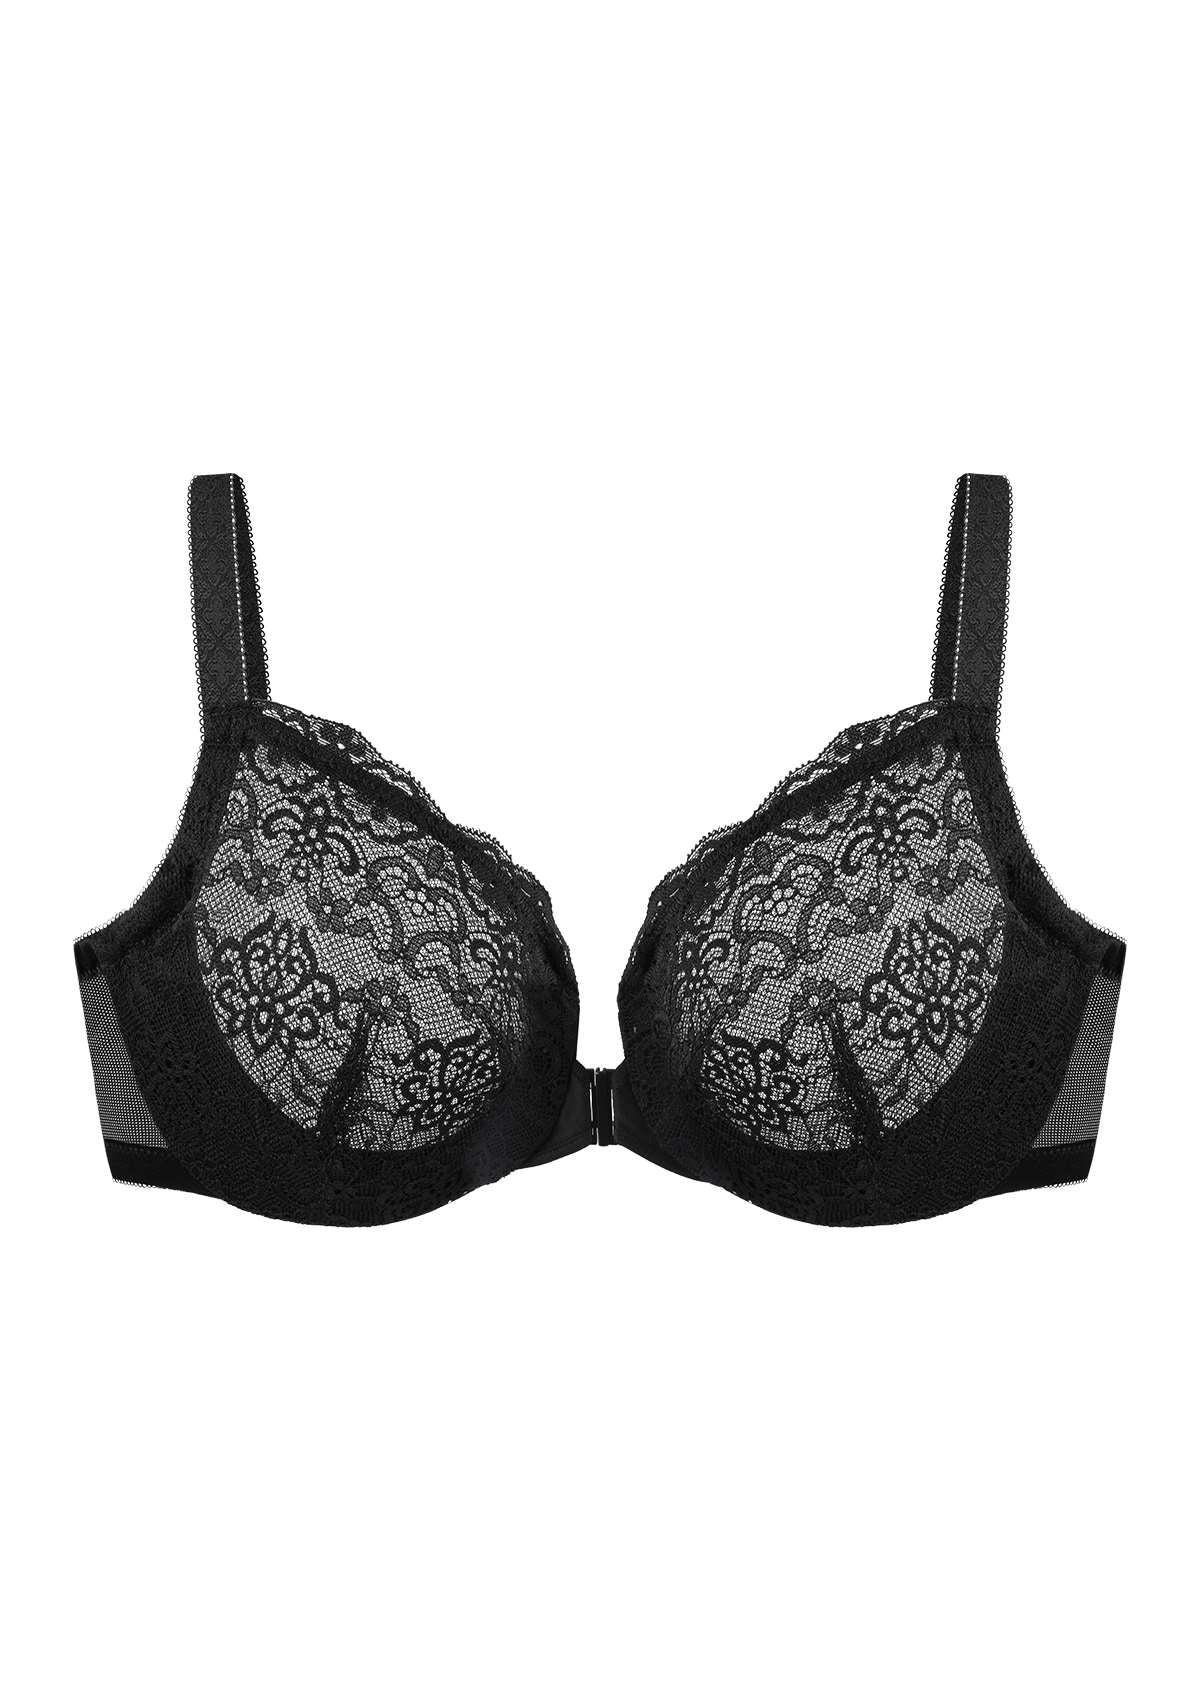 HSIA Nymphaea Front-Close Unlined Retro Floral Lace Back Smoothing Bra - Black / 40 / H